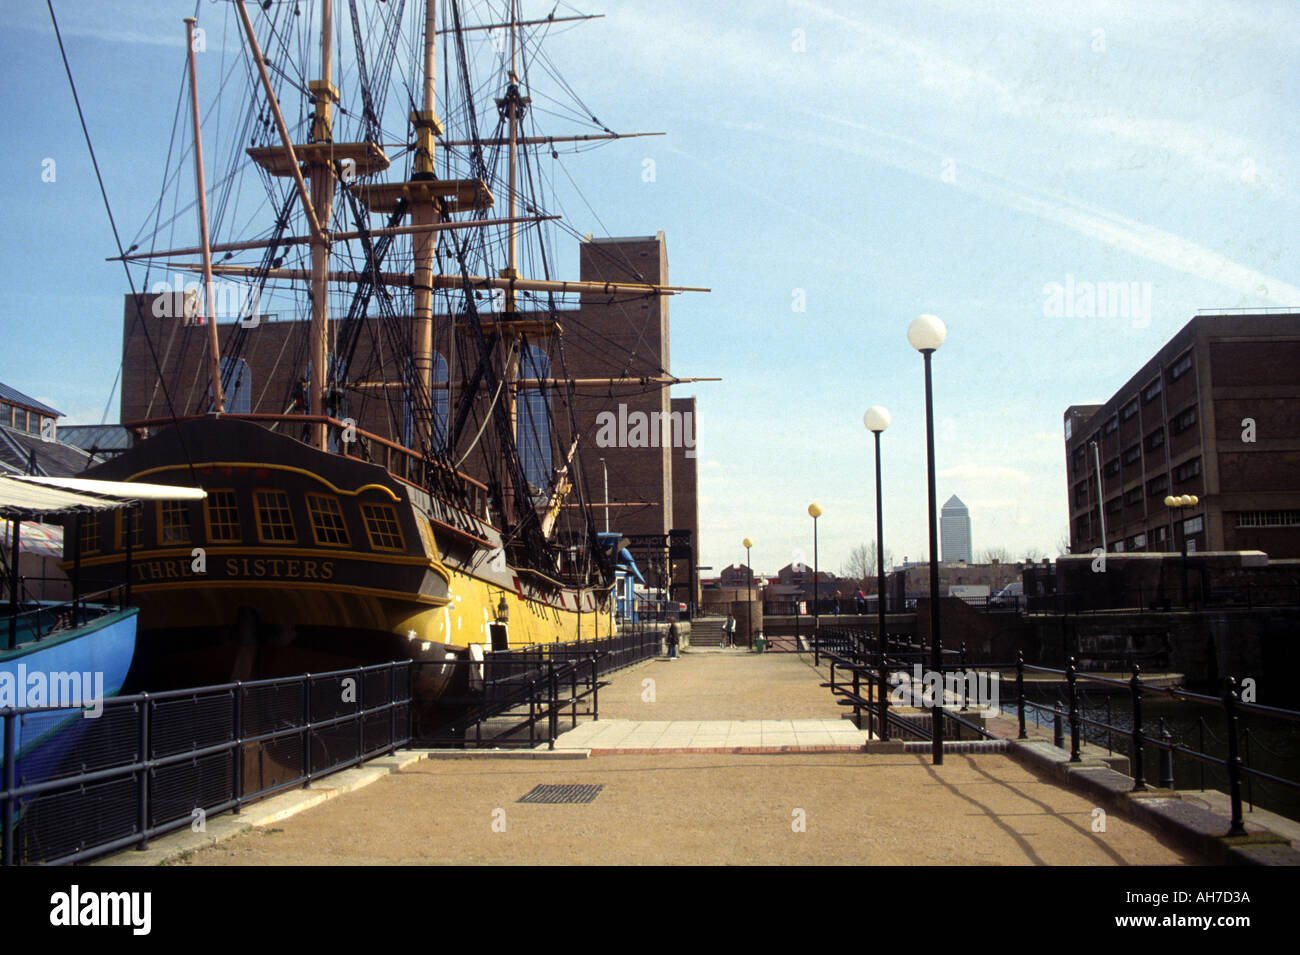 New housing development and old sailing ship Wapping London Docklands England circa 1994 Stock Photo